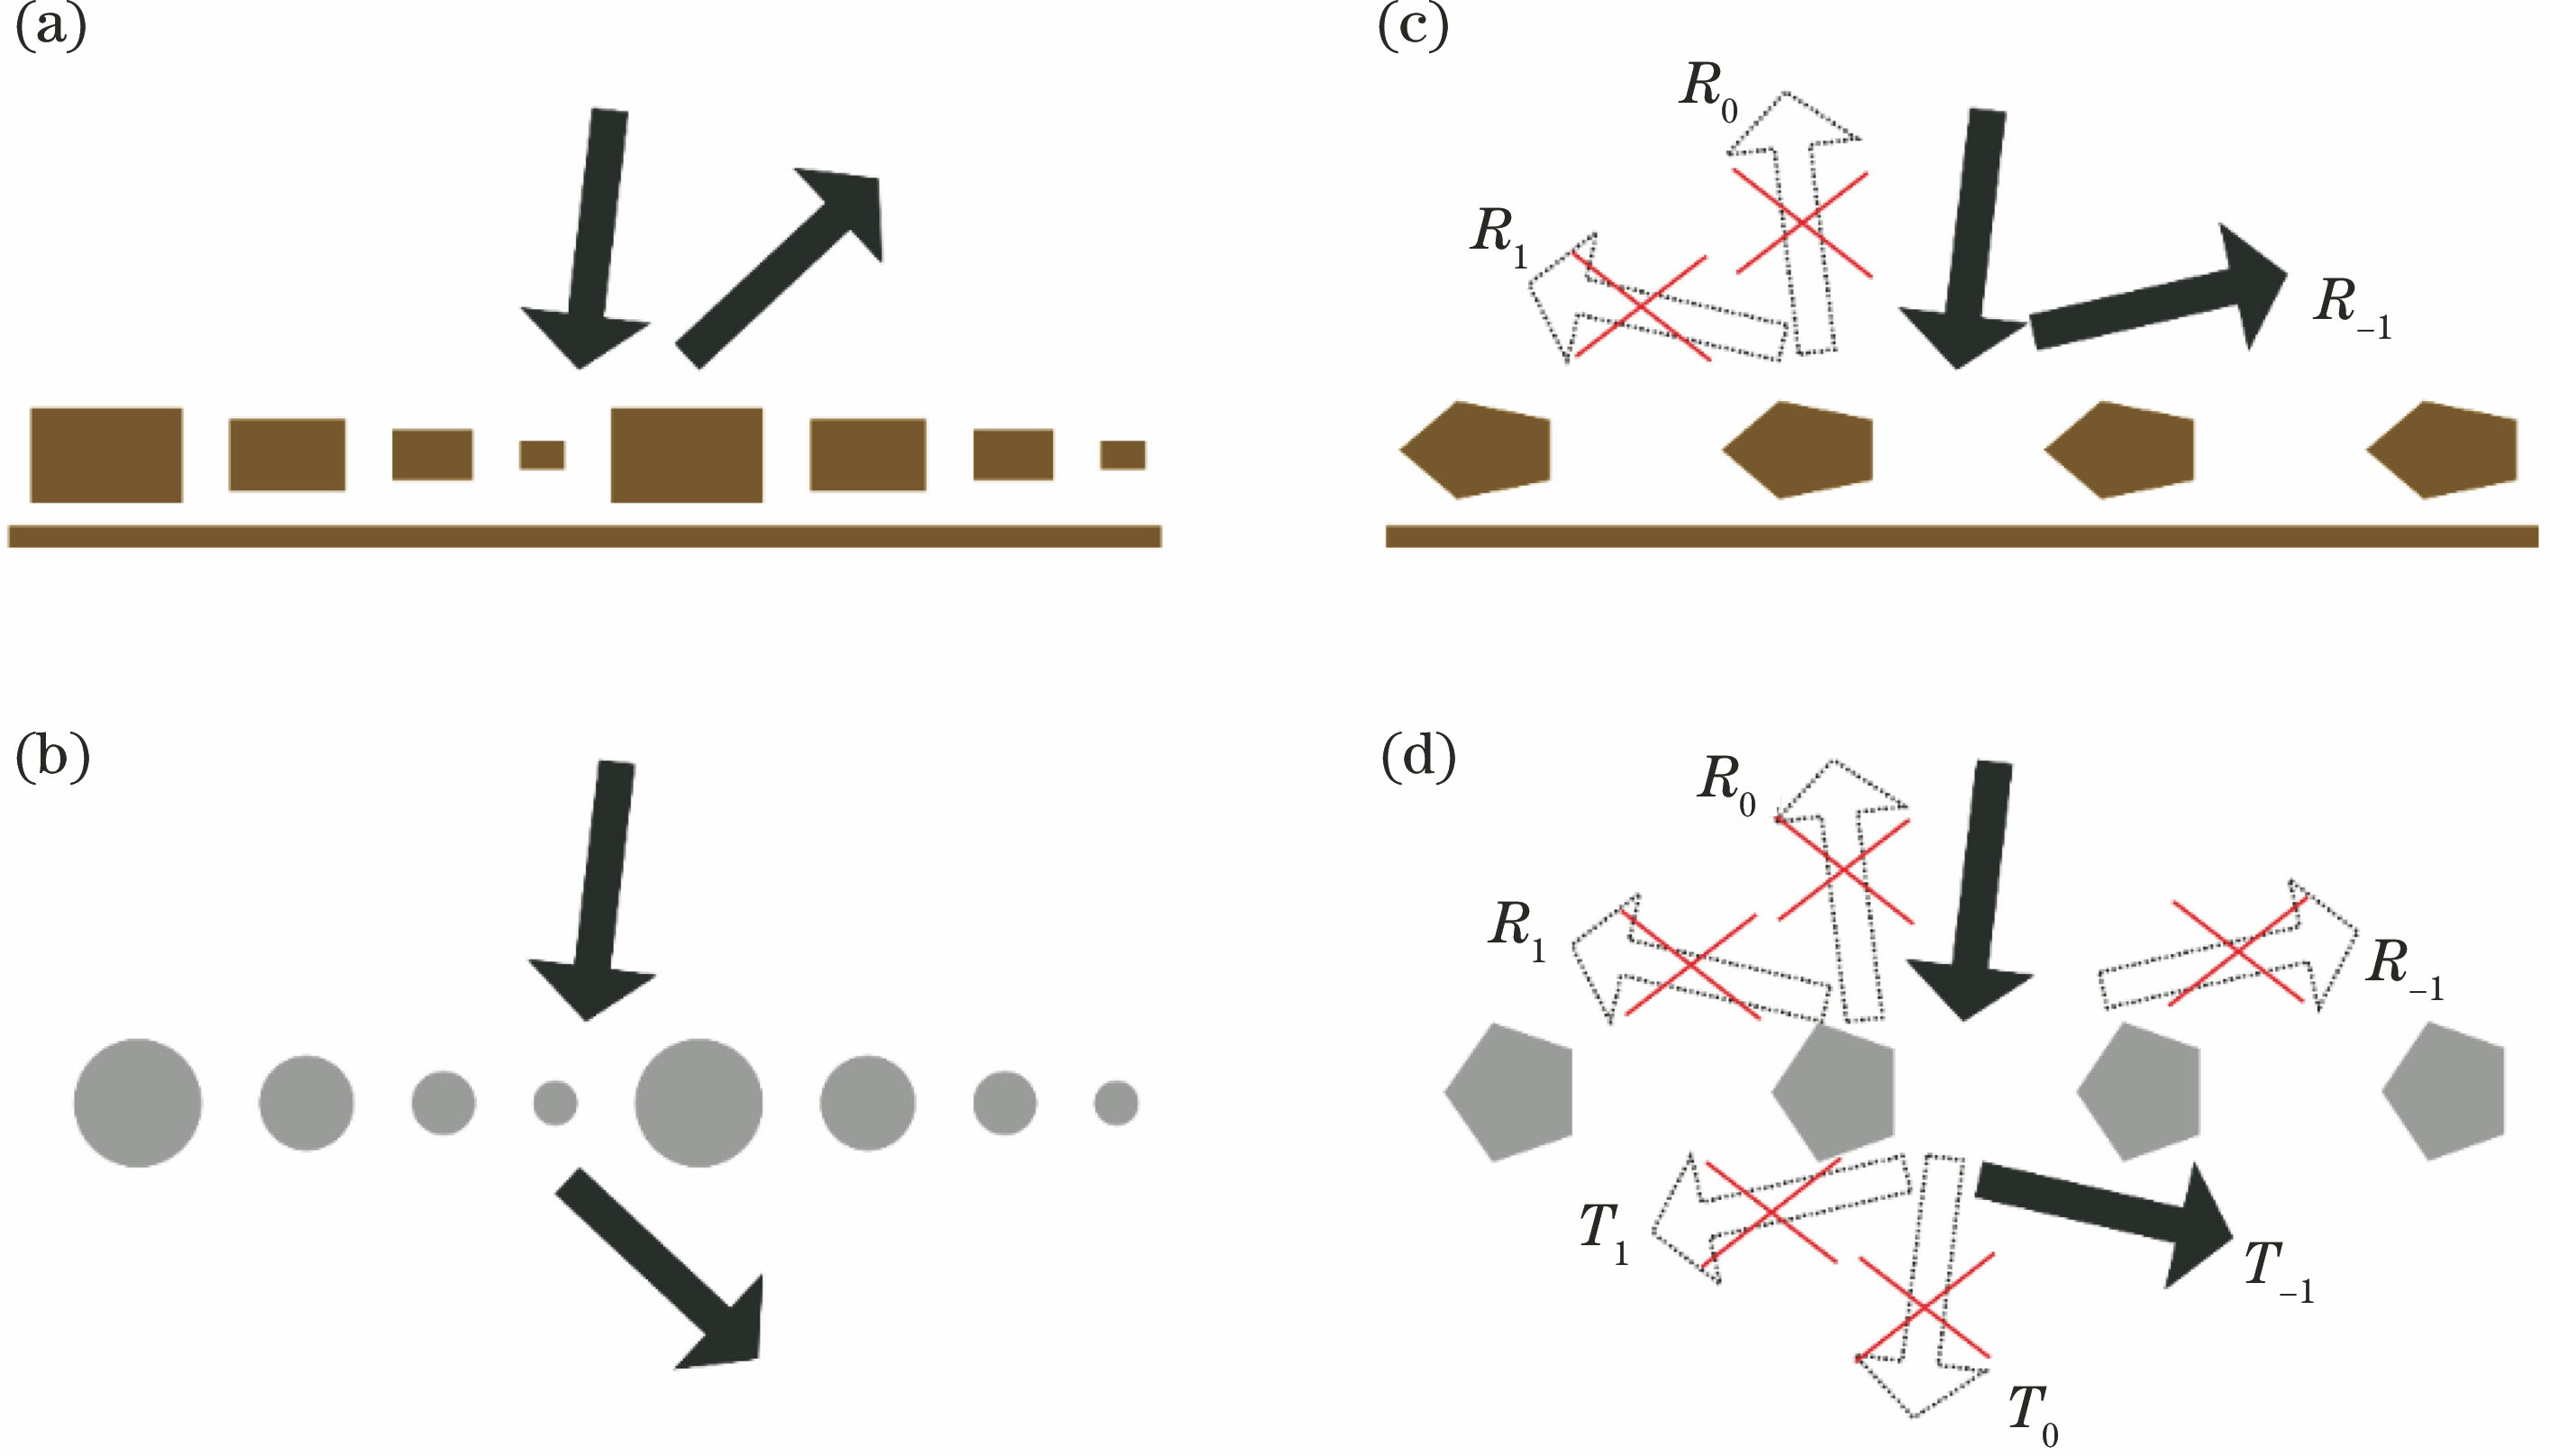 Schematic for comparison between phase-gradient metasurfaces and single unit-cell metagrating structures. (a) Reflection and (b) transmission phase-gradient metasurfaces; (c) reflection and (d) transmission single unit-cell metagrating surfaces